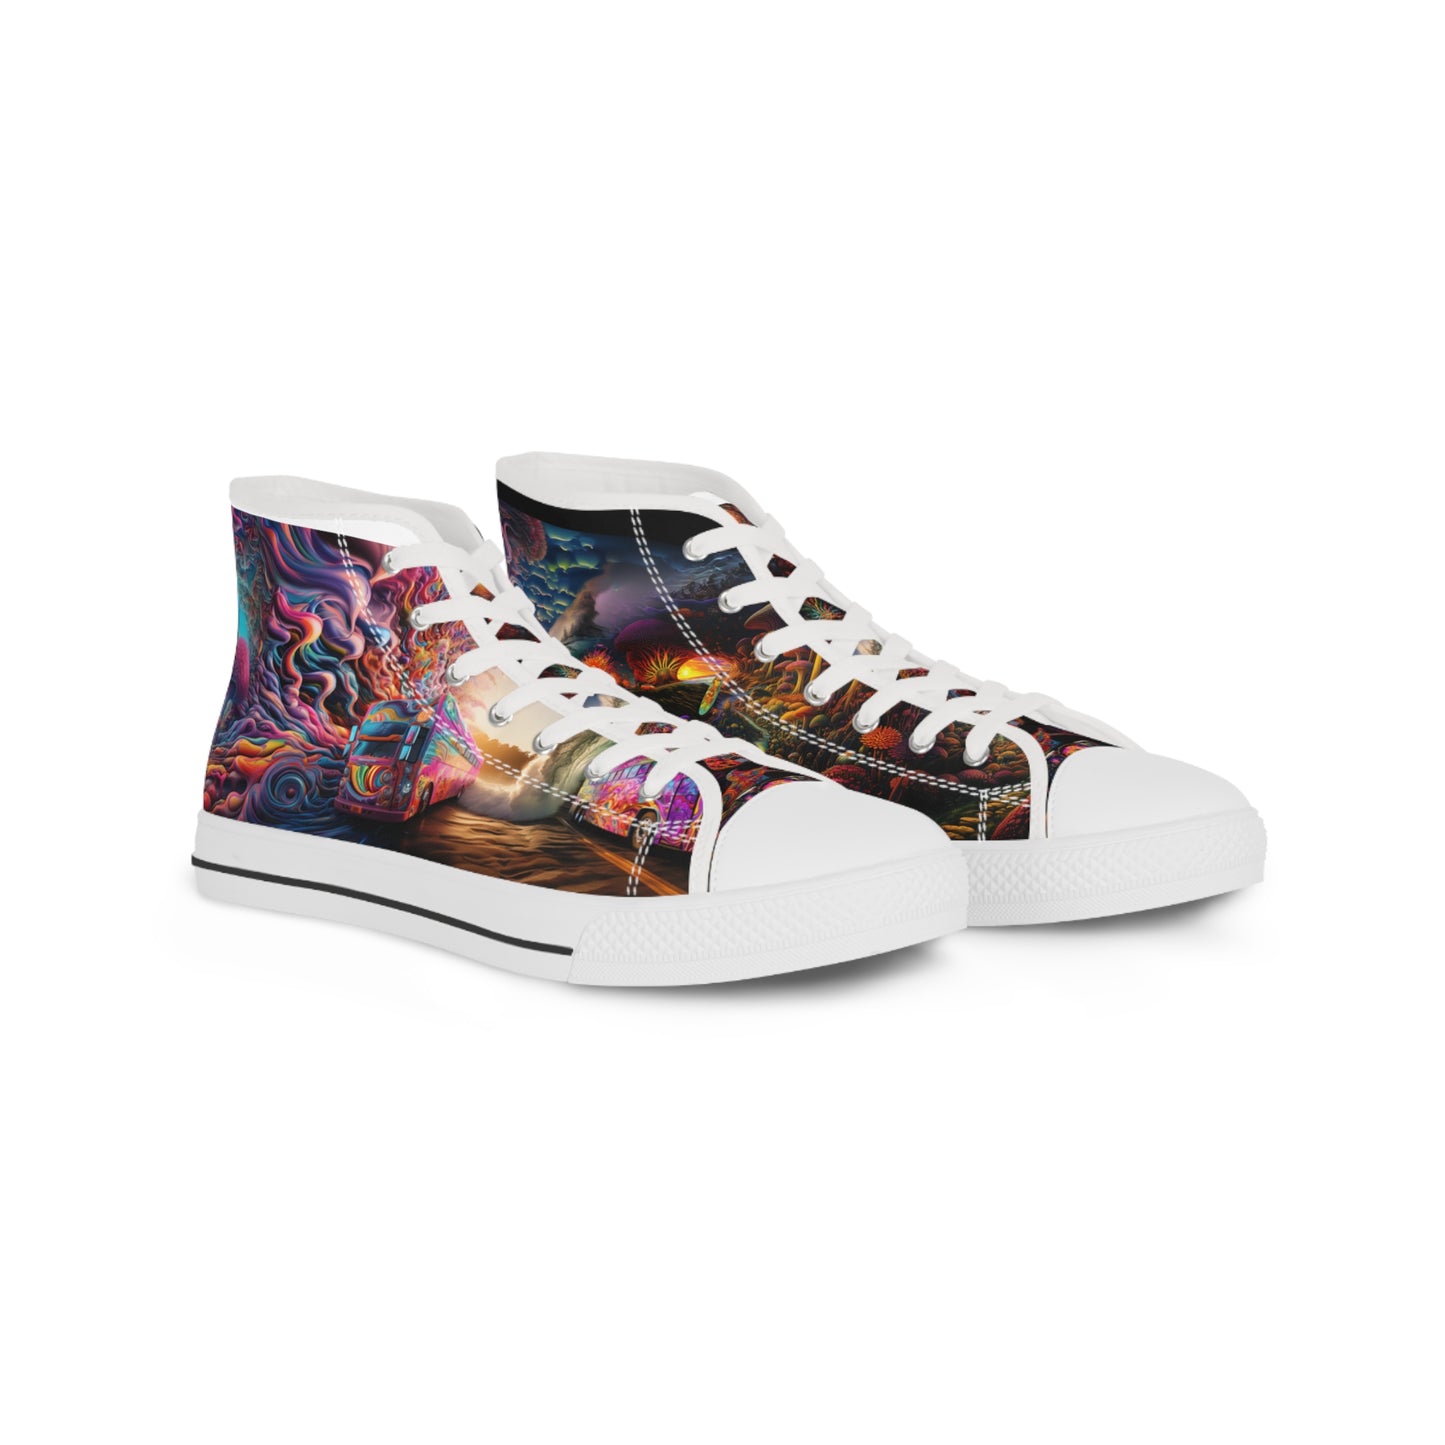 Step into the Psychedelic Realm with our Unisex High Top Sneakers #001. Artistry meets comfort, exclusively at Stashbox.ai.